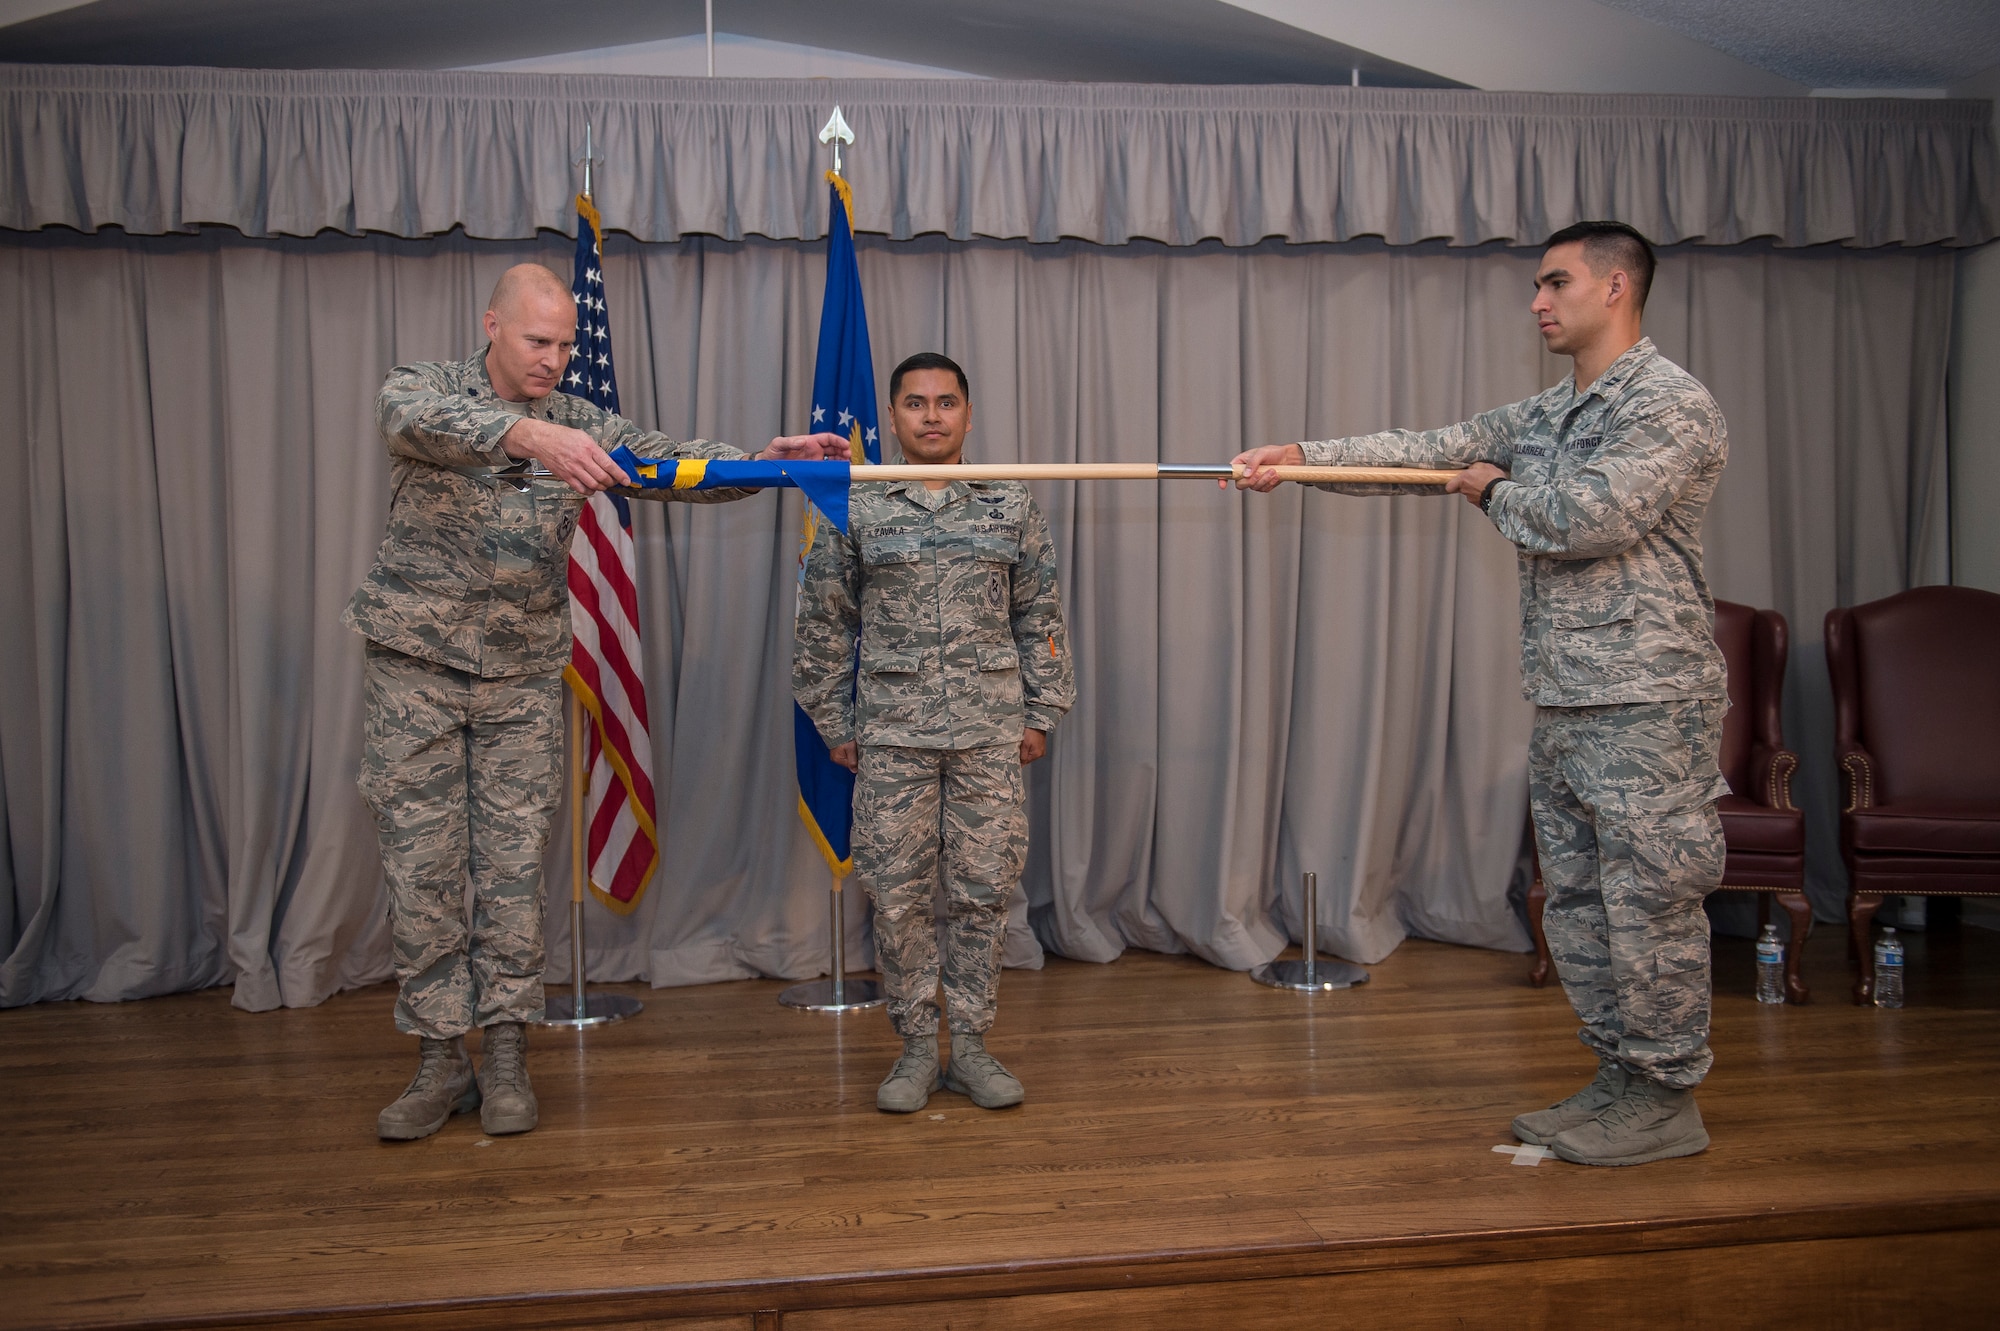 Lt. Col. Corey Beaverson, 47th Cyberspace Test Squadron Commander, unfurls the unit guidon for Detachment 1, 47th CTS, during the detachment's activation ceremony at Edwards Air Force Base, California, Nov. 19. Det. 1 will be commanded by Lt. Col. Ever Zavala (center). (Air Force photo by Joshua Miller)